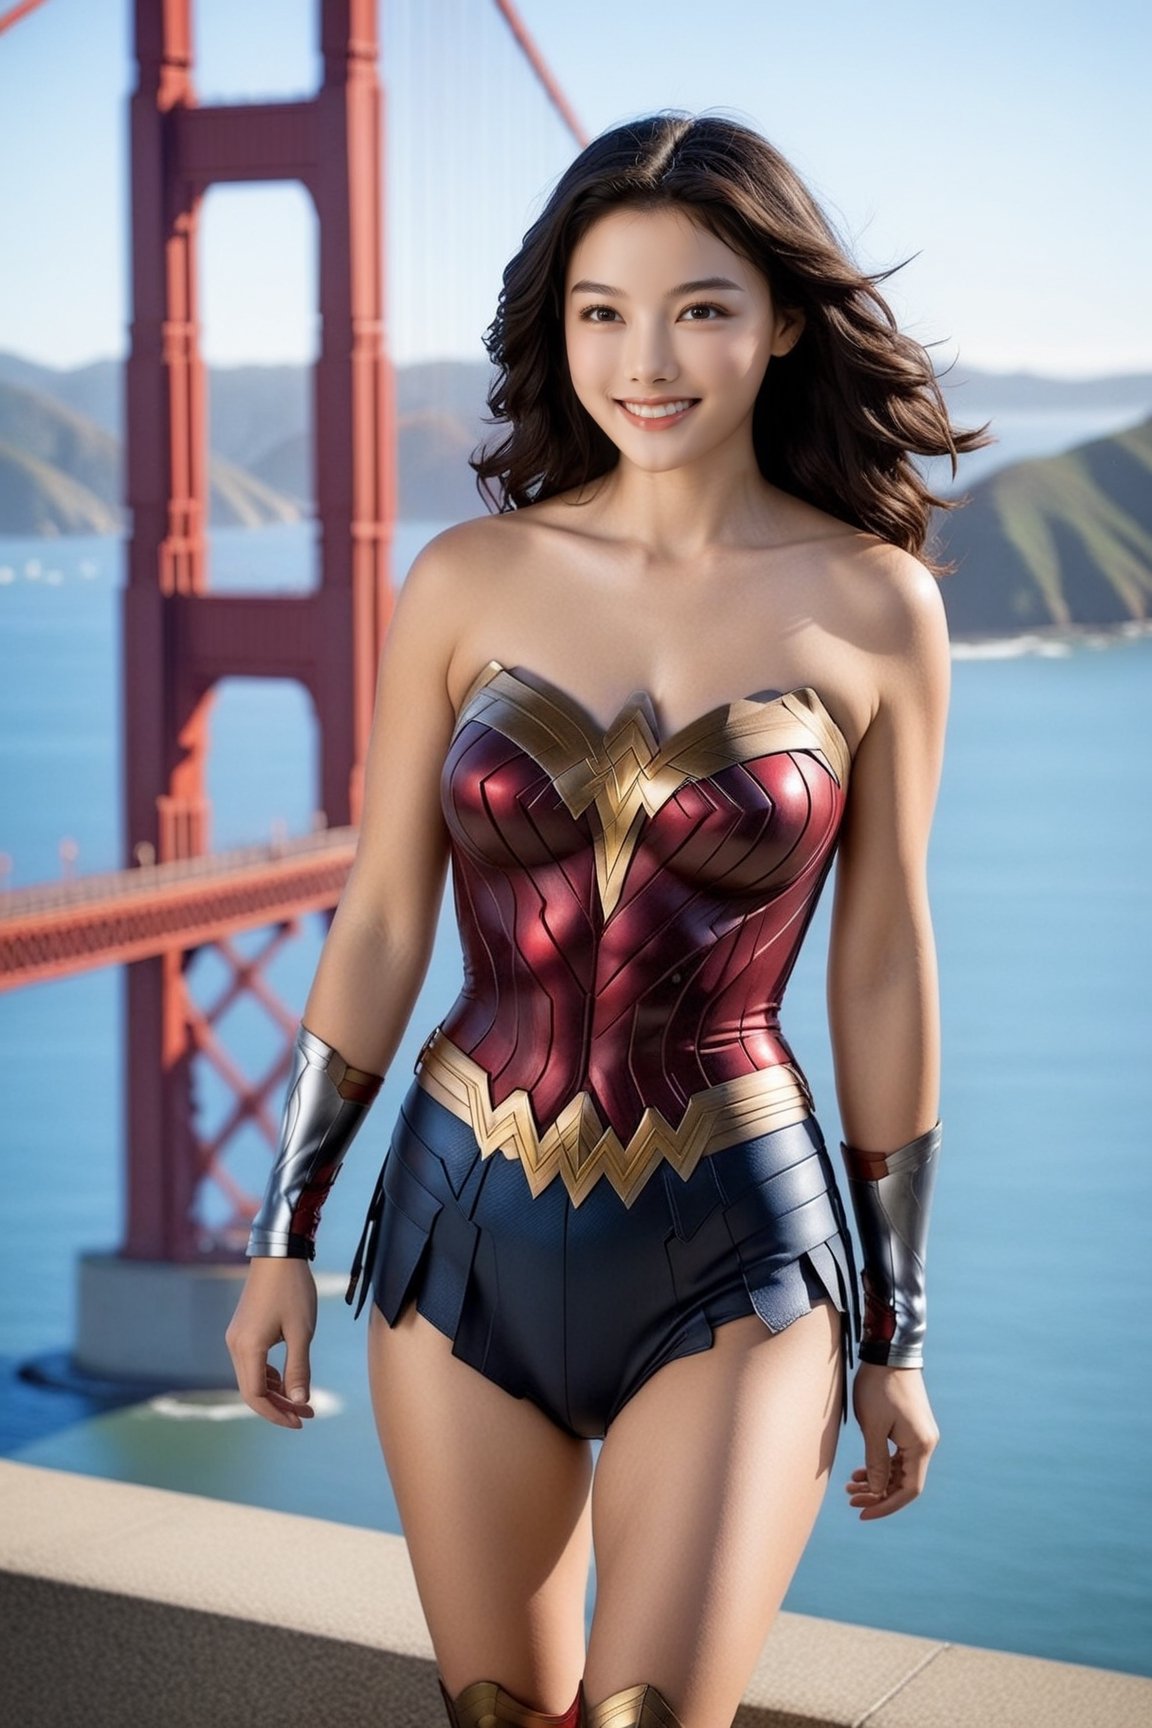 Hyper-Realistic photo of a girl,20yo,1girl,perfect female form,perfect body proportion,perfect anatomy,detailed exquisite face,soft shiny skin,smile,mesmerizing,short hair,small earrings,necklaces
BREAK
backdrop of a beautiful golden gate bridge in San Francisco,ocean,(fullbody:1.3),(distant view:1.2),(heels:1.3),(model pose)
BREAK
(rule of thirds:1.3),perfect composition,studio photo,trending on artstation,(Masterpiece,Best quality,32k,UHD:1.5),(sharp focus,high contrast,HDR,hyper-detailed,intricate details,ultra-realistic,award-winning photo,ultra-clear,kodachrome 800:1.3),(chiaroscuro lighting,soft rim lighting:1.2),by Karol Bak,Antonio Lopez,Gustav Klimt and Hayao Miyazaki,photo_b00ster,real_booster,ani_booster,wonder-woman-xl,kim youjung